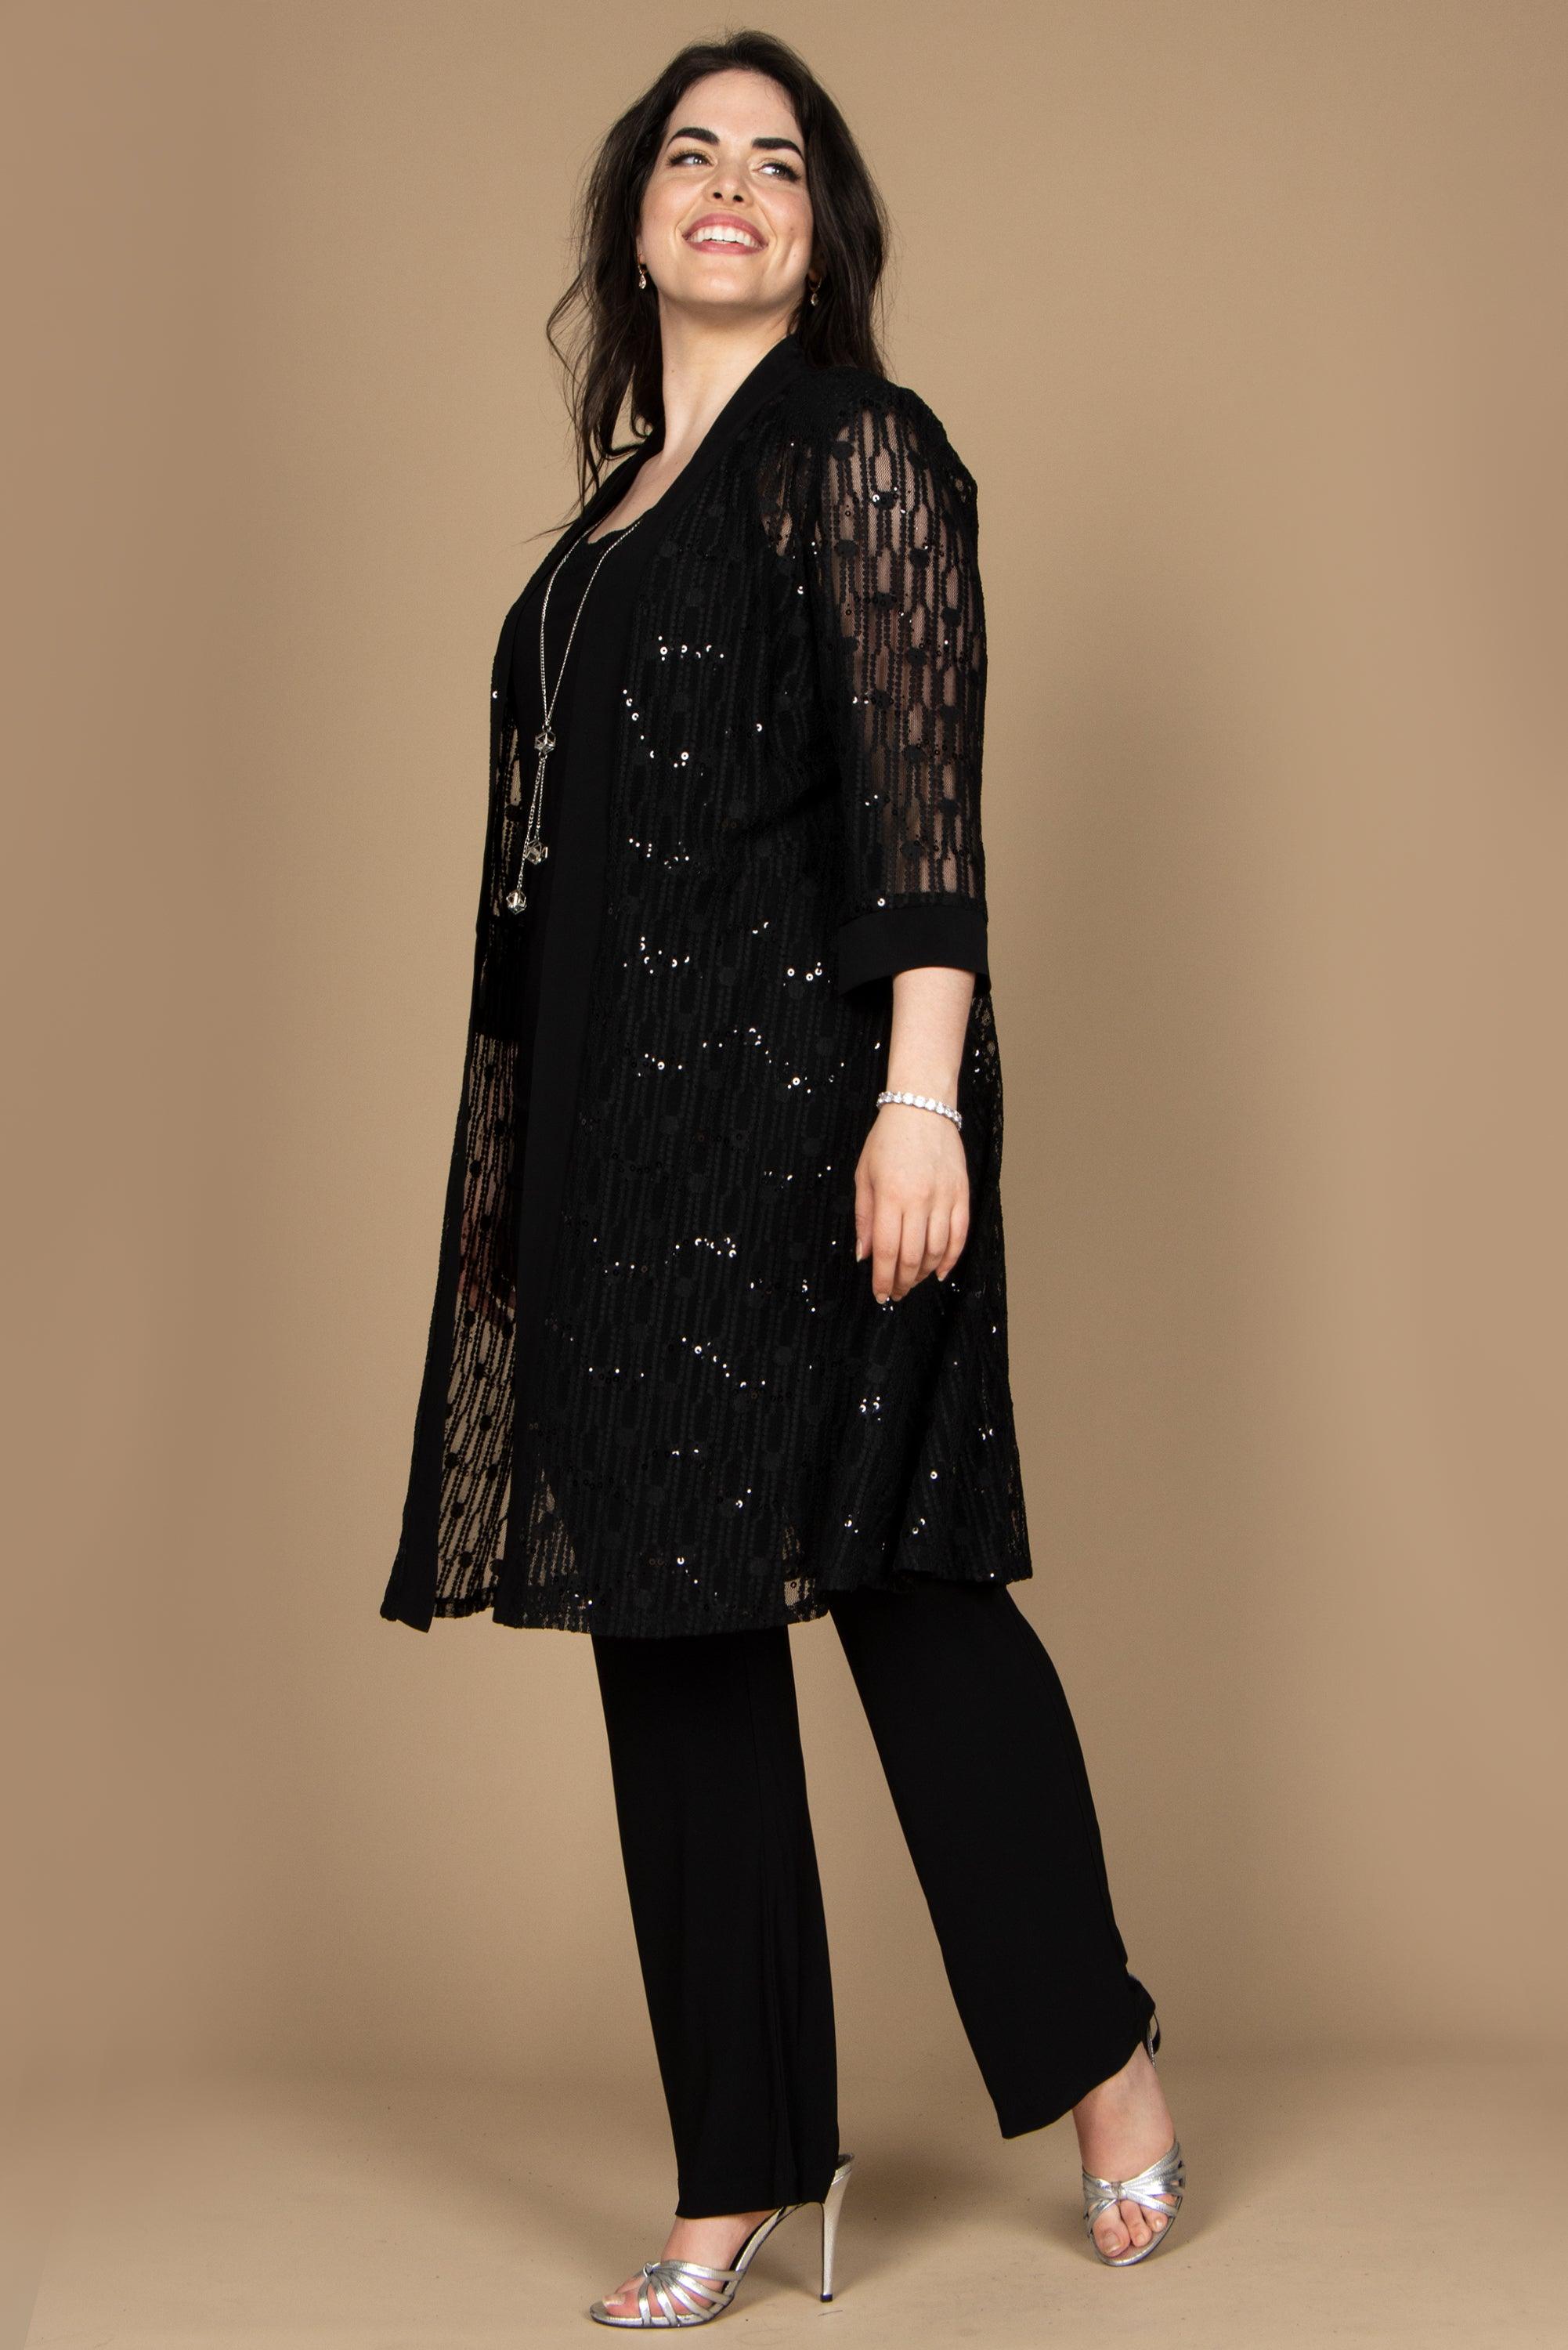 Black R&M Richards 7914 Formal Duster Pant Suit for $98.99 – The